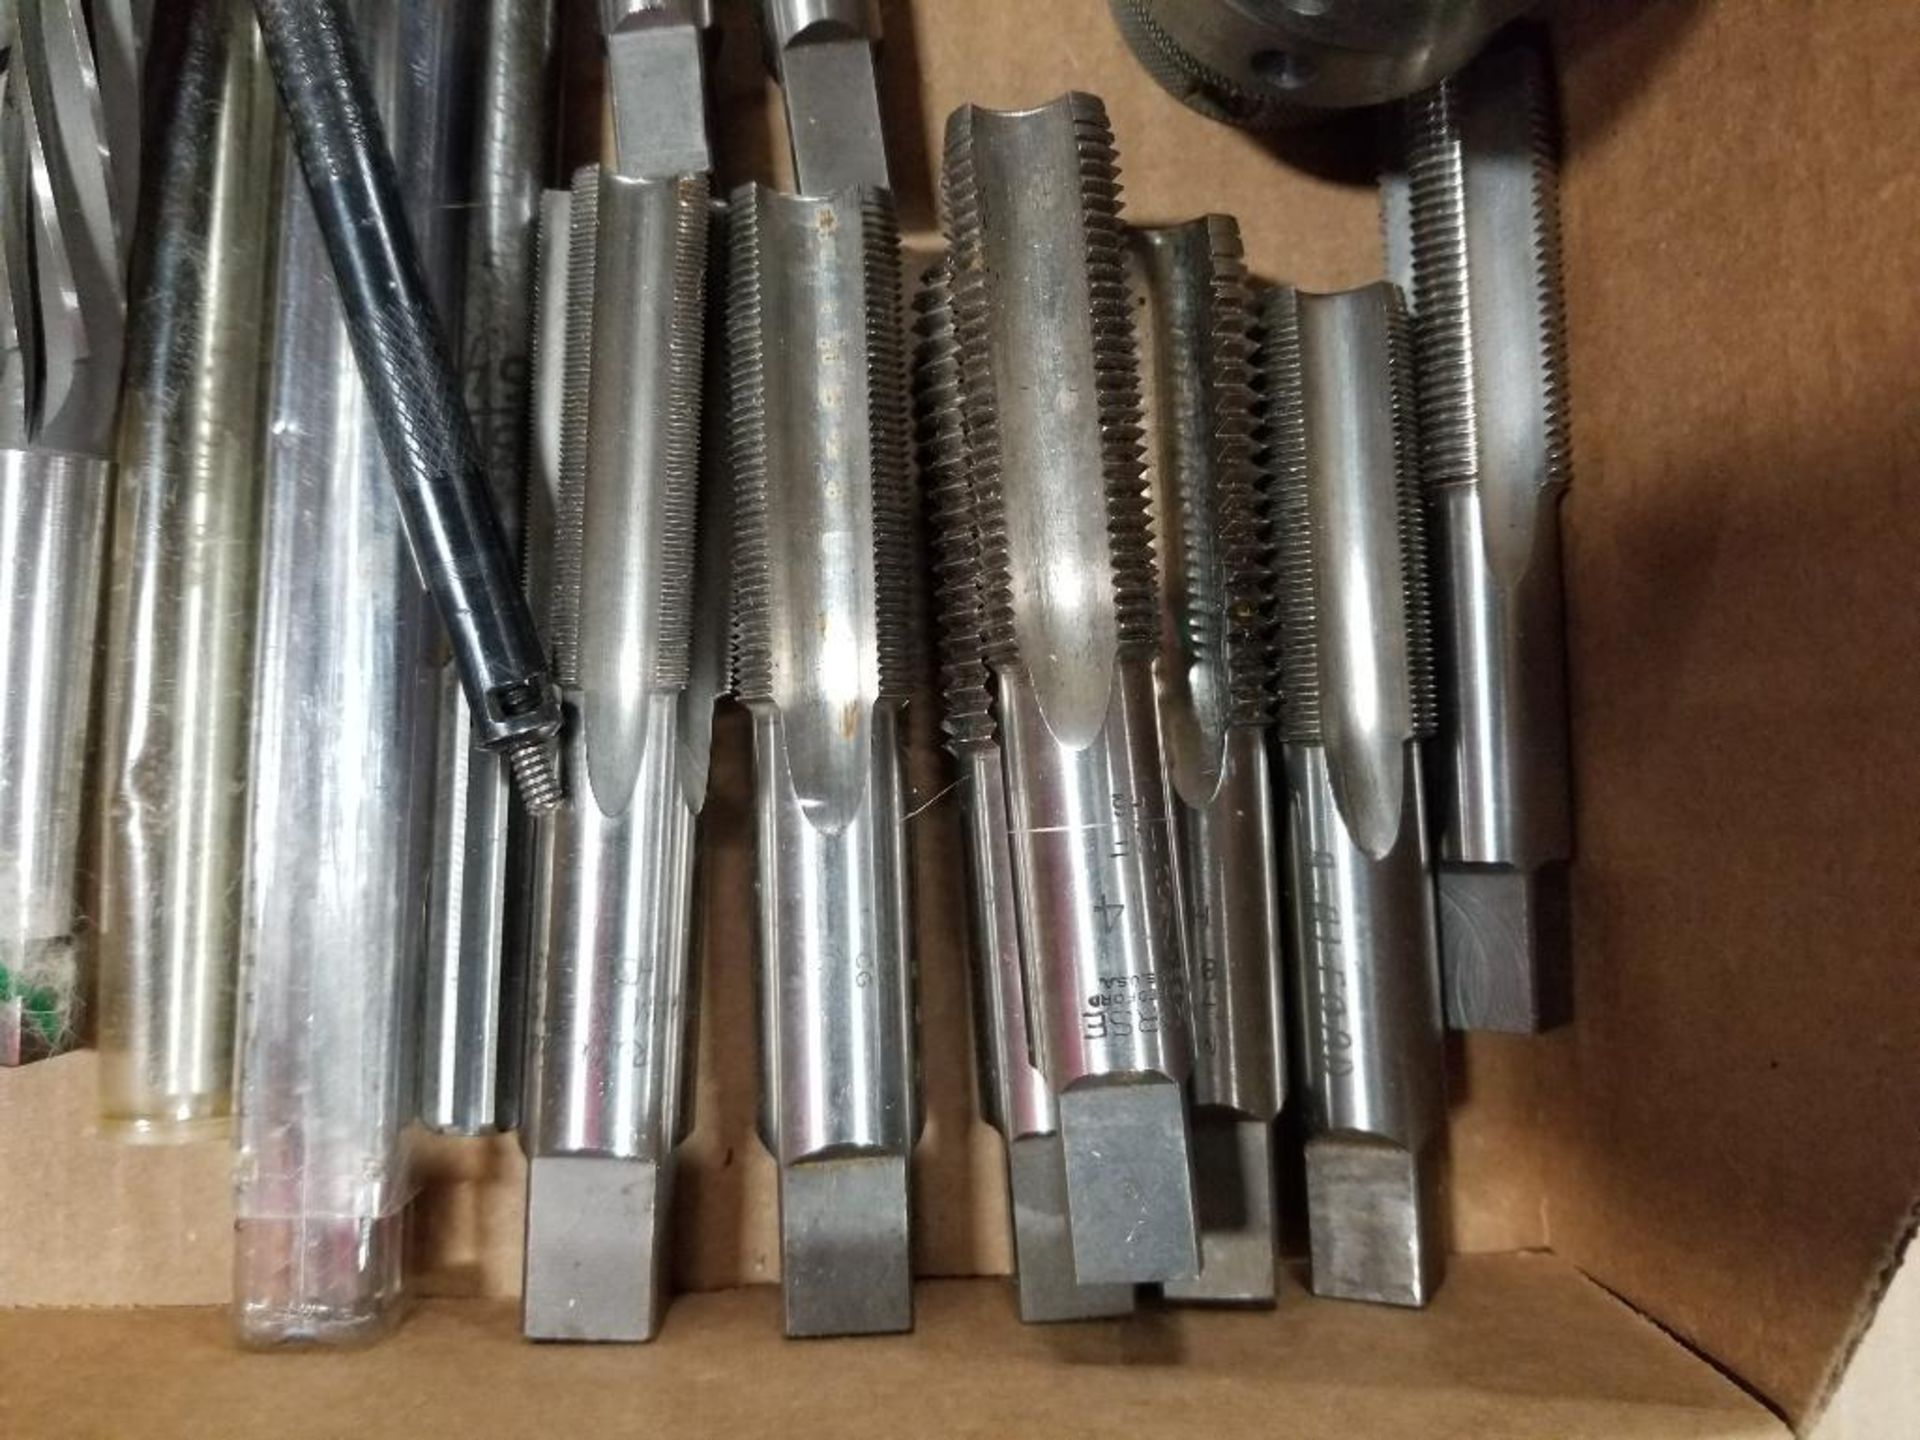 Assorted metalworking tooling. Cutters, taps, reamers. - Image 13 of 18